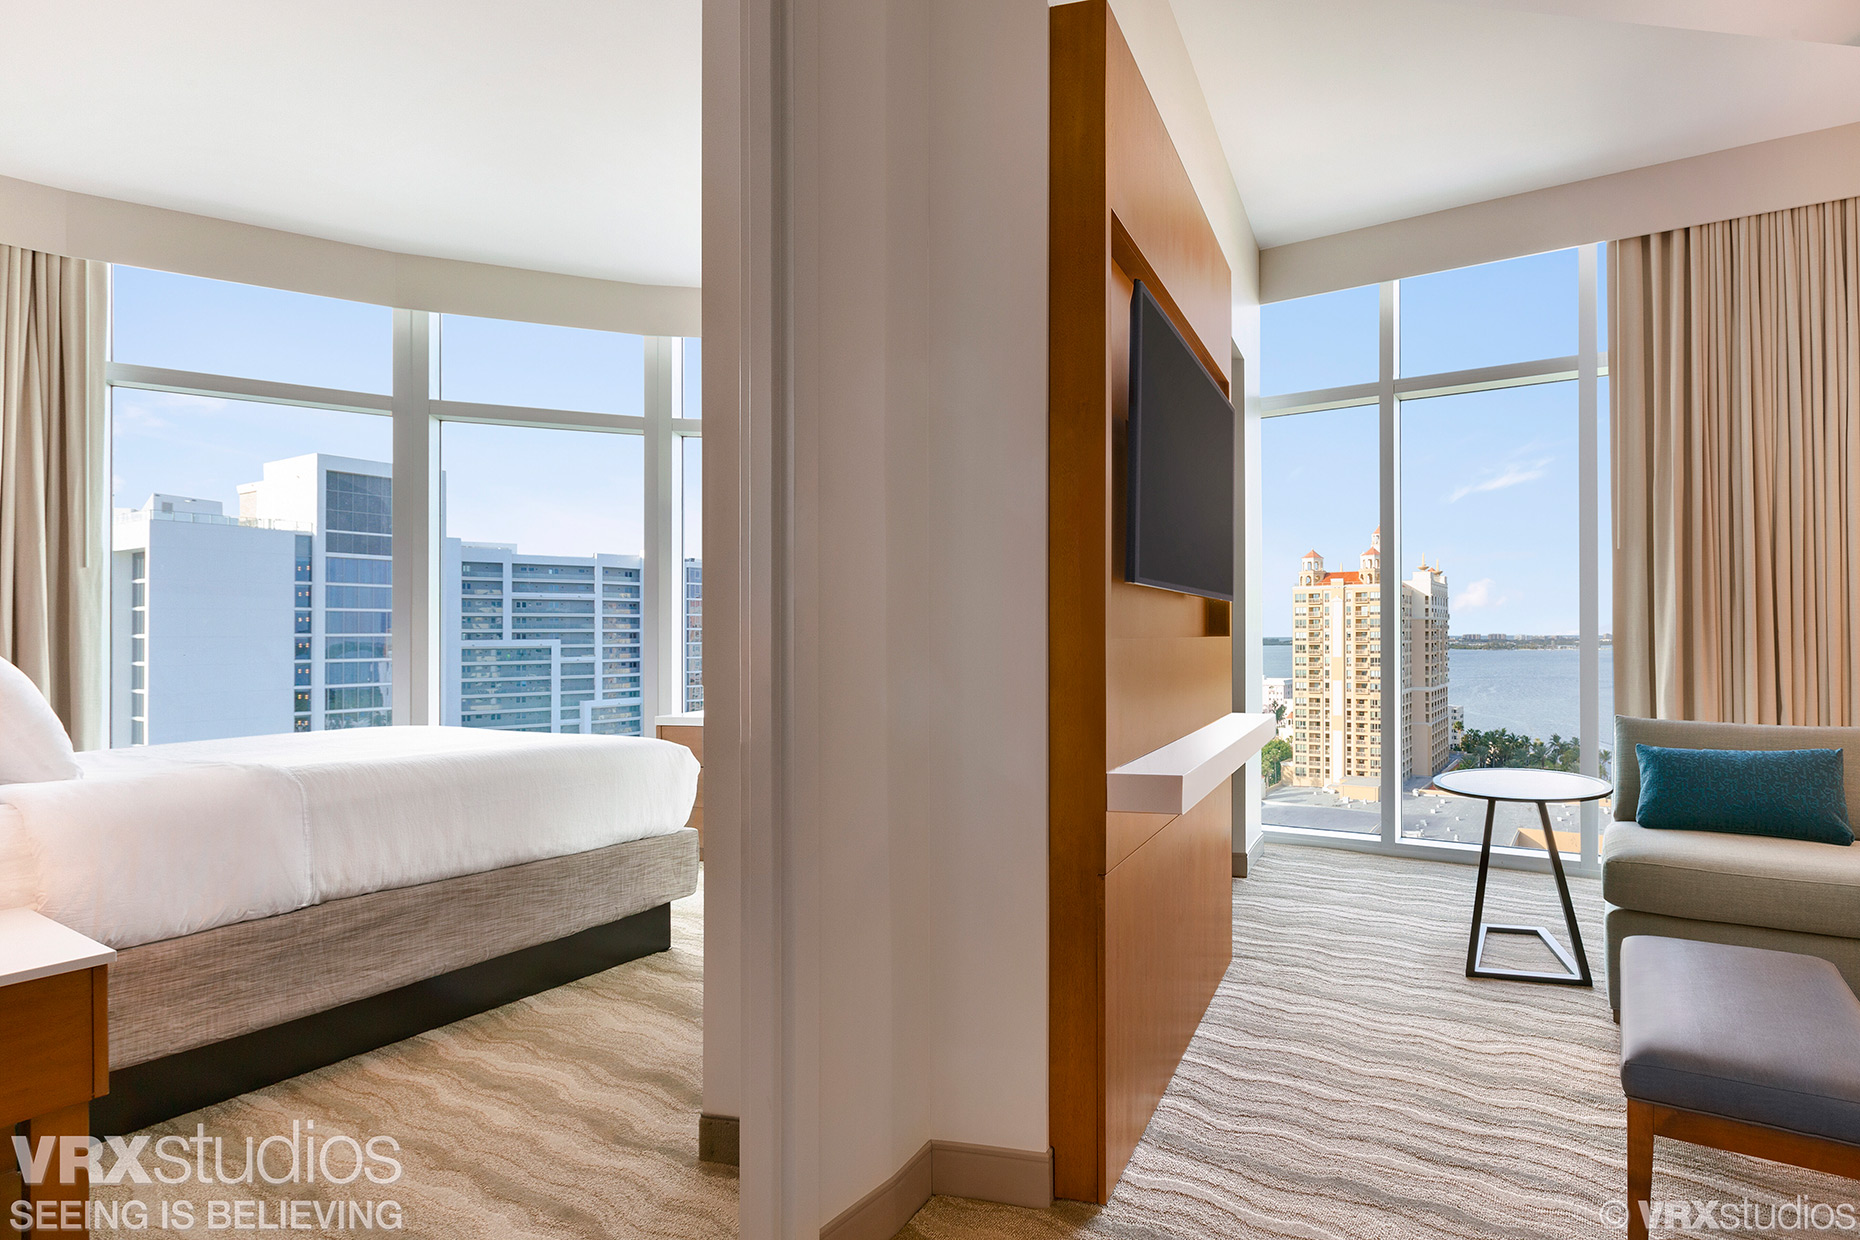 Tom DiMatteo Hotel and Architectural Photographer Austin Texas